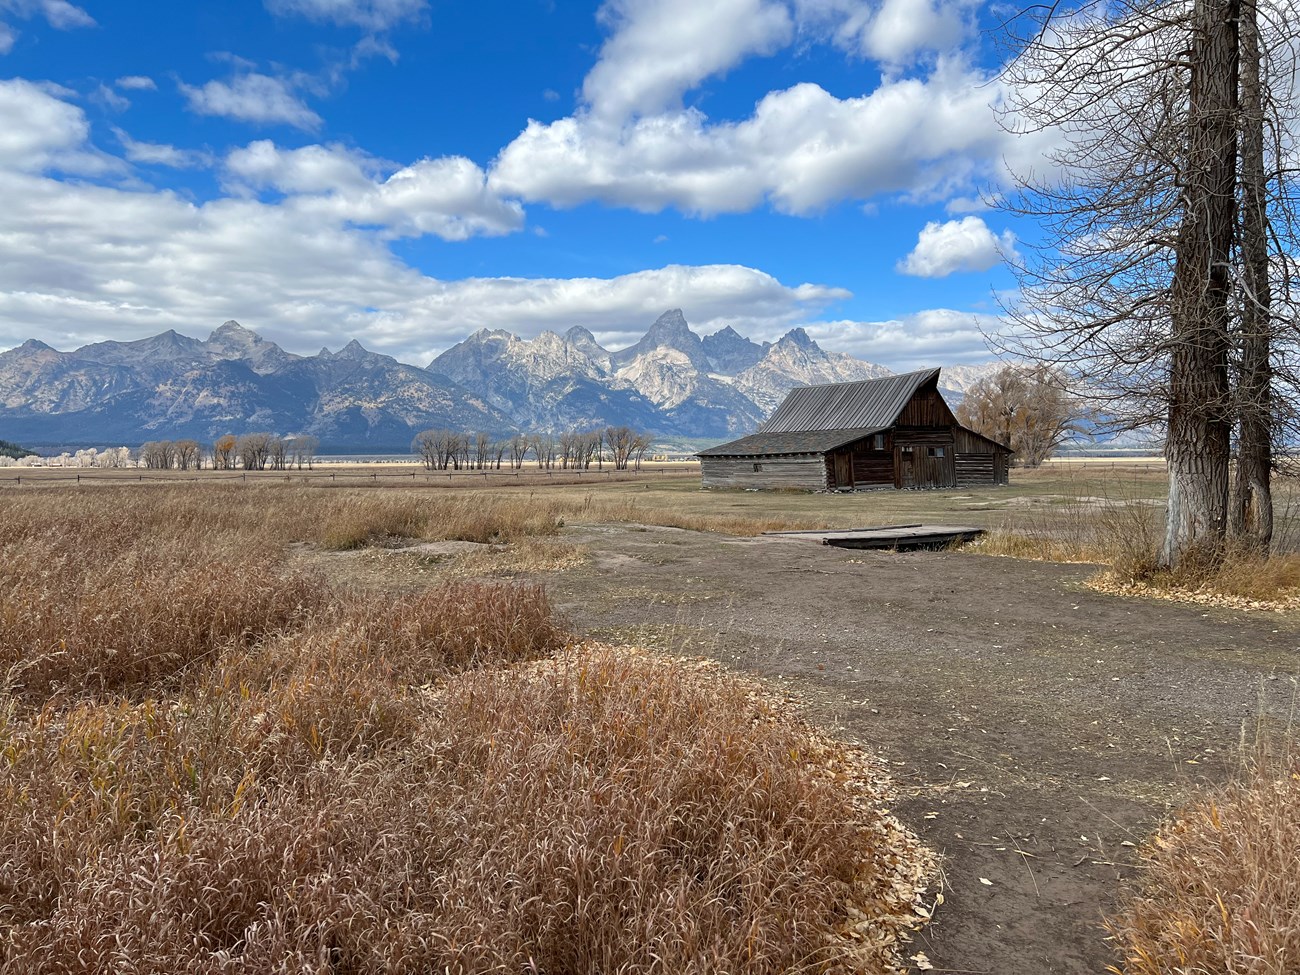 View of T.A. Moulton Barn with Teton range in backdrop